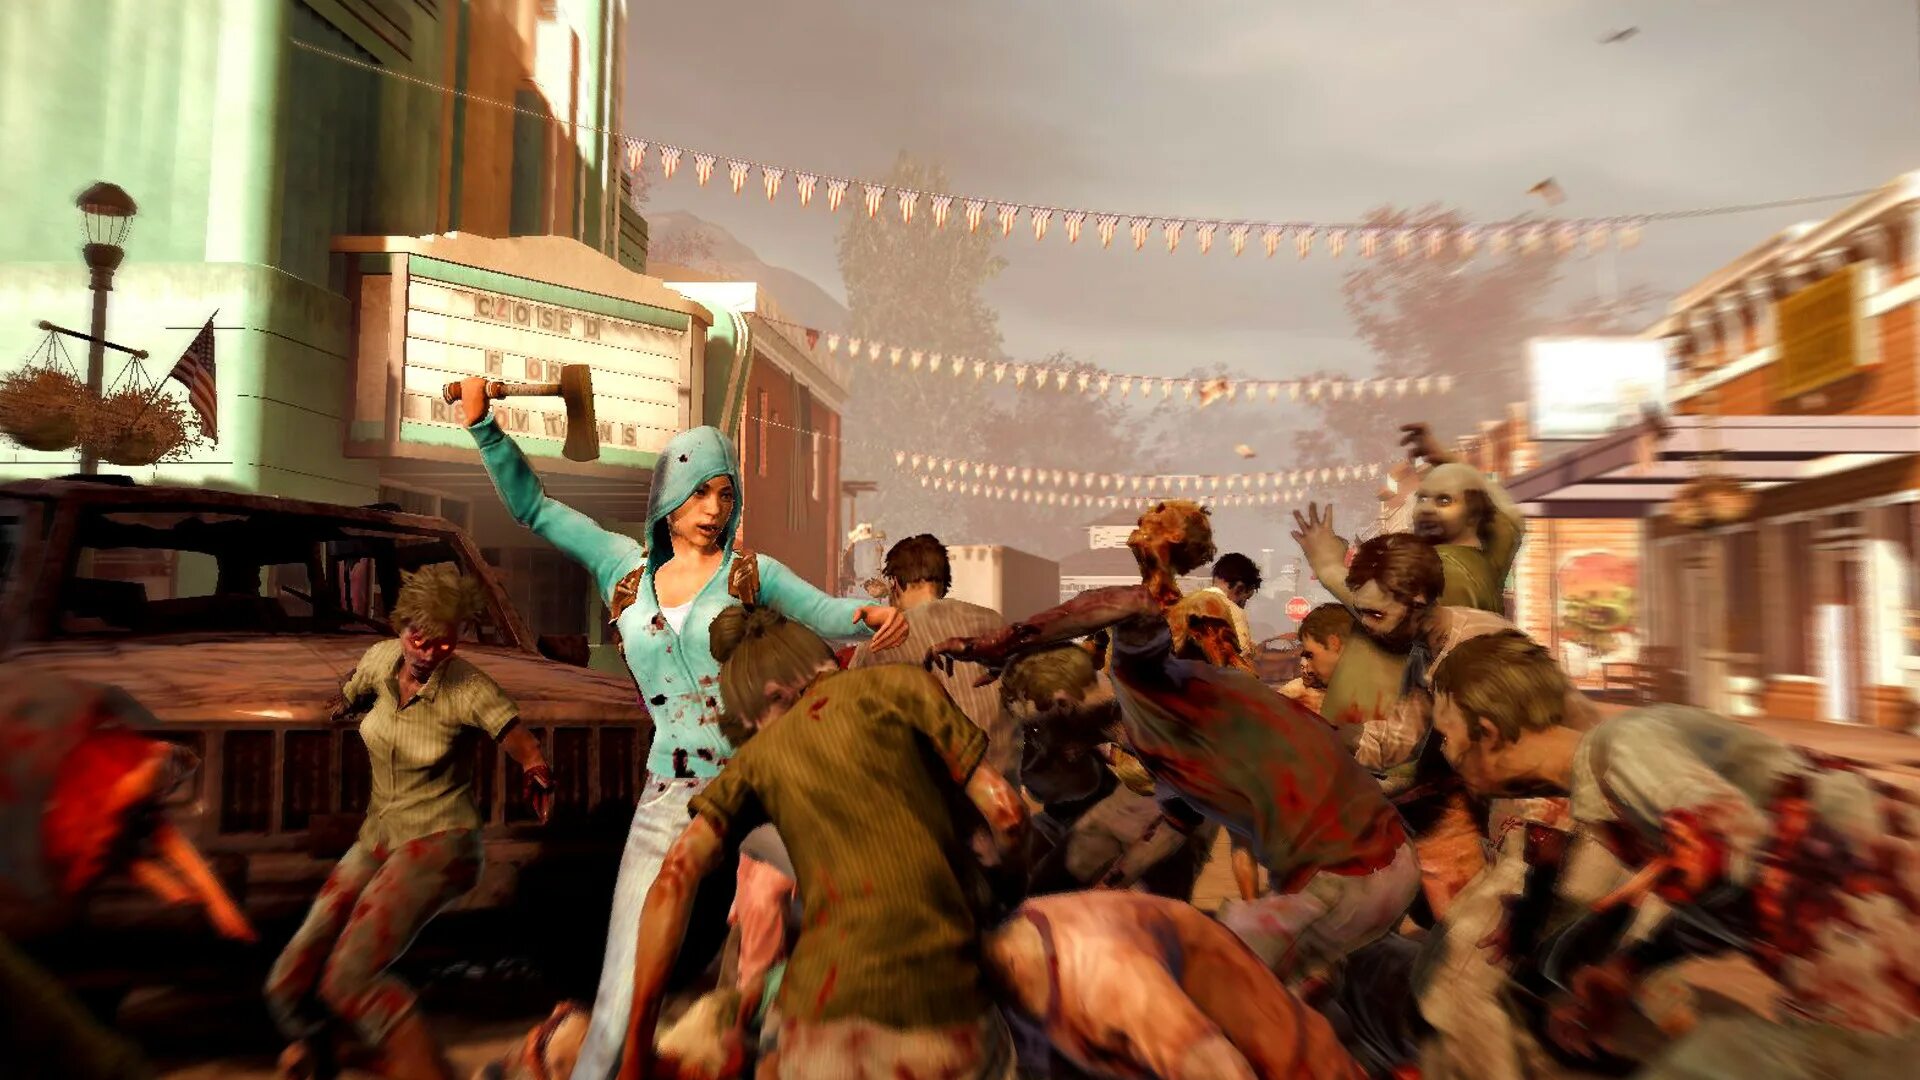 State of Decay yose - Day one Edition. State of Decay: year one Survival Edition. State of decay механик